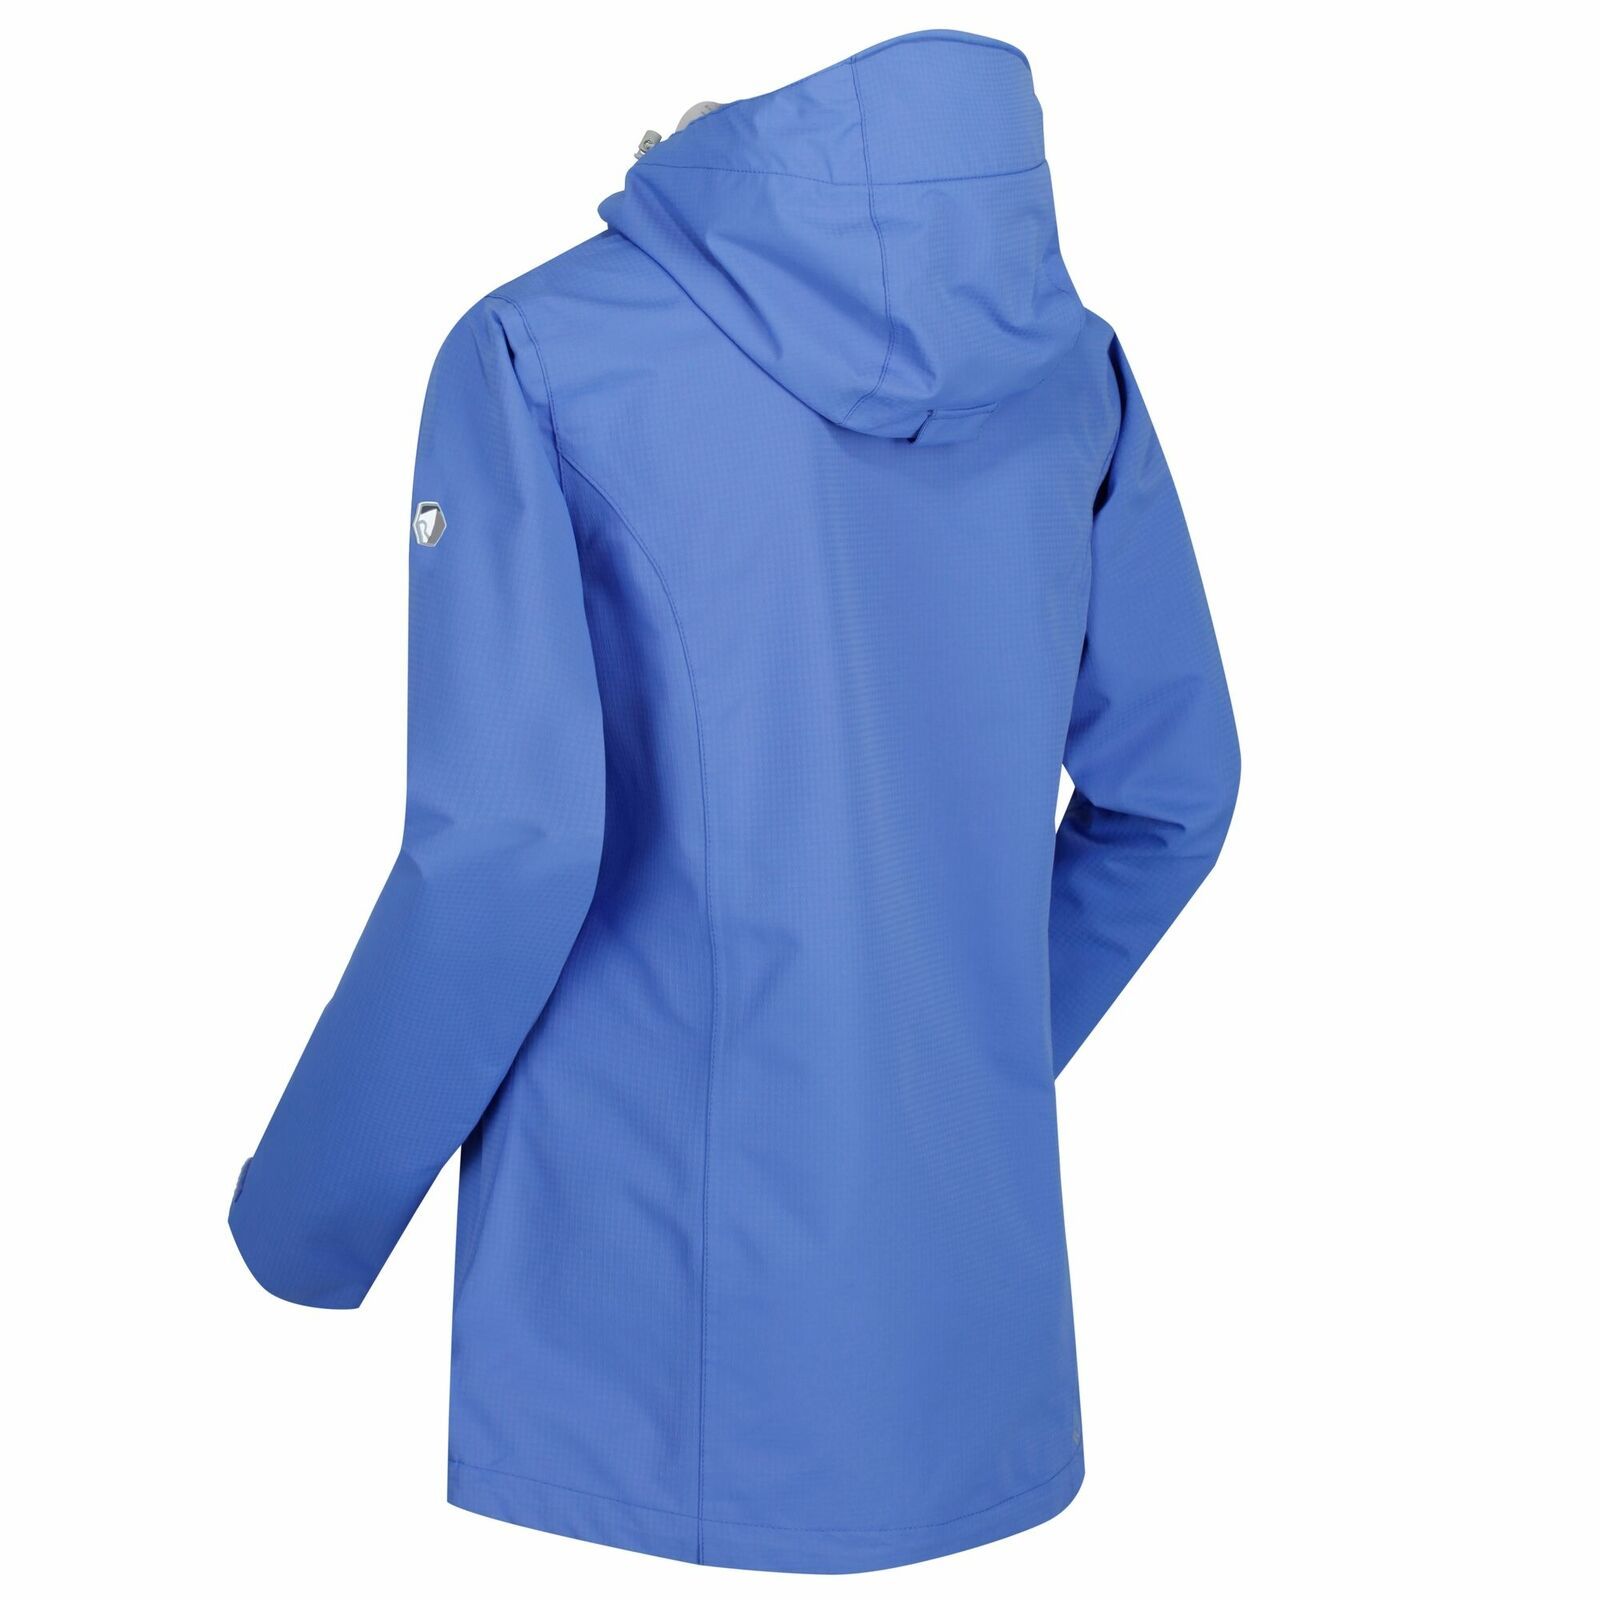 100% Polyester. Weatherproof hooded jacket made from breathable Isotex 5000. DWR water resistant finish. Attached adjustable technical hood. Internal zipped security pocket. 2 zipped pockets. Ideal for wet weather. Hand wash.